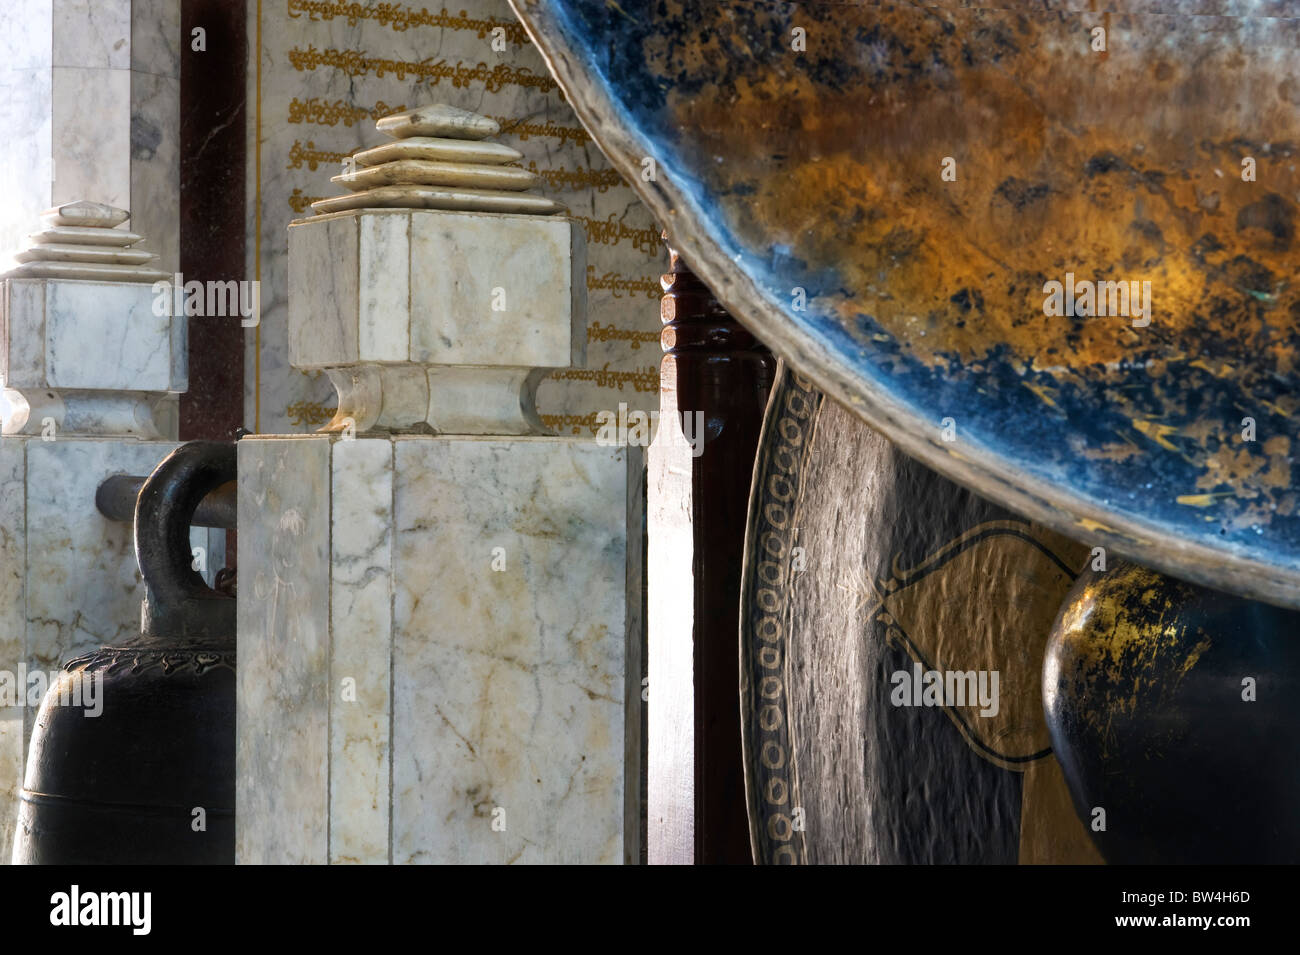 temple bell with two gongs in shrine Stock Photo